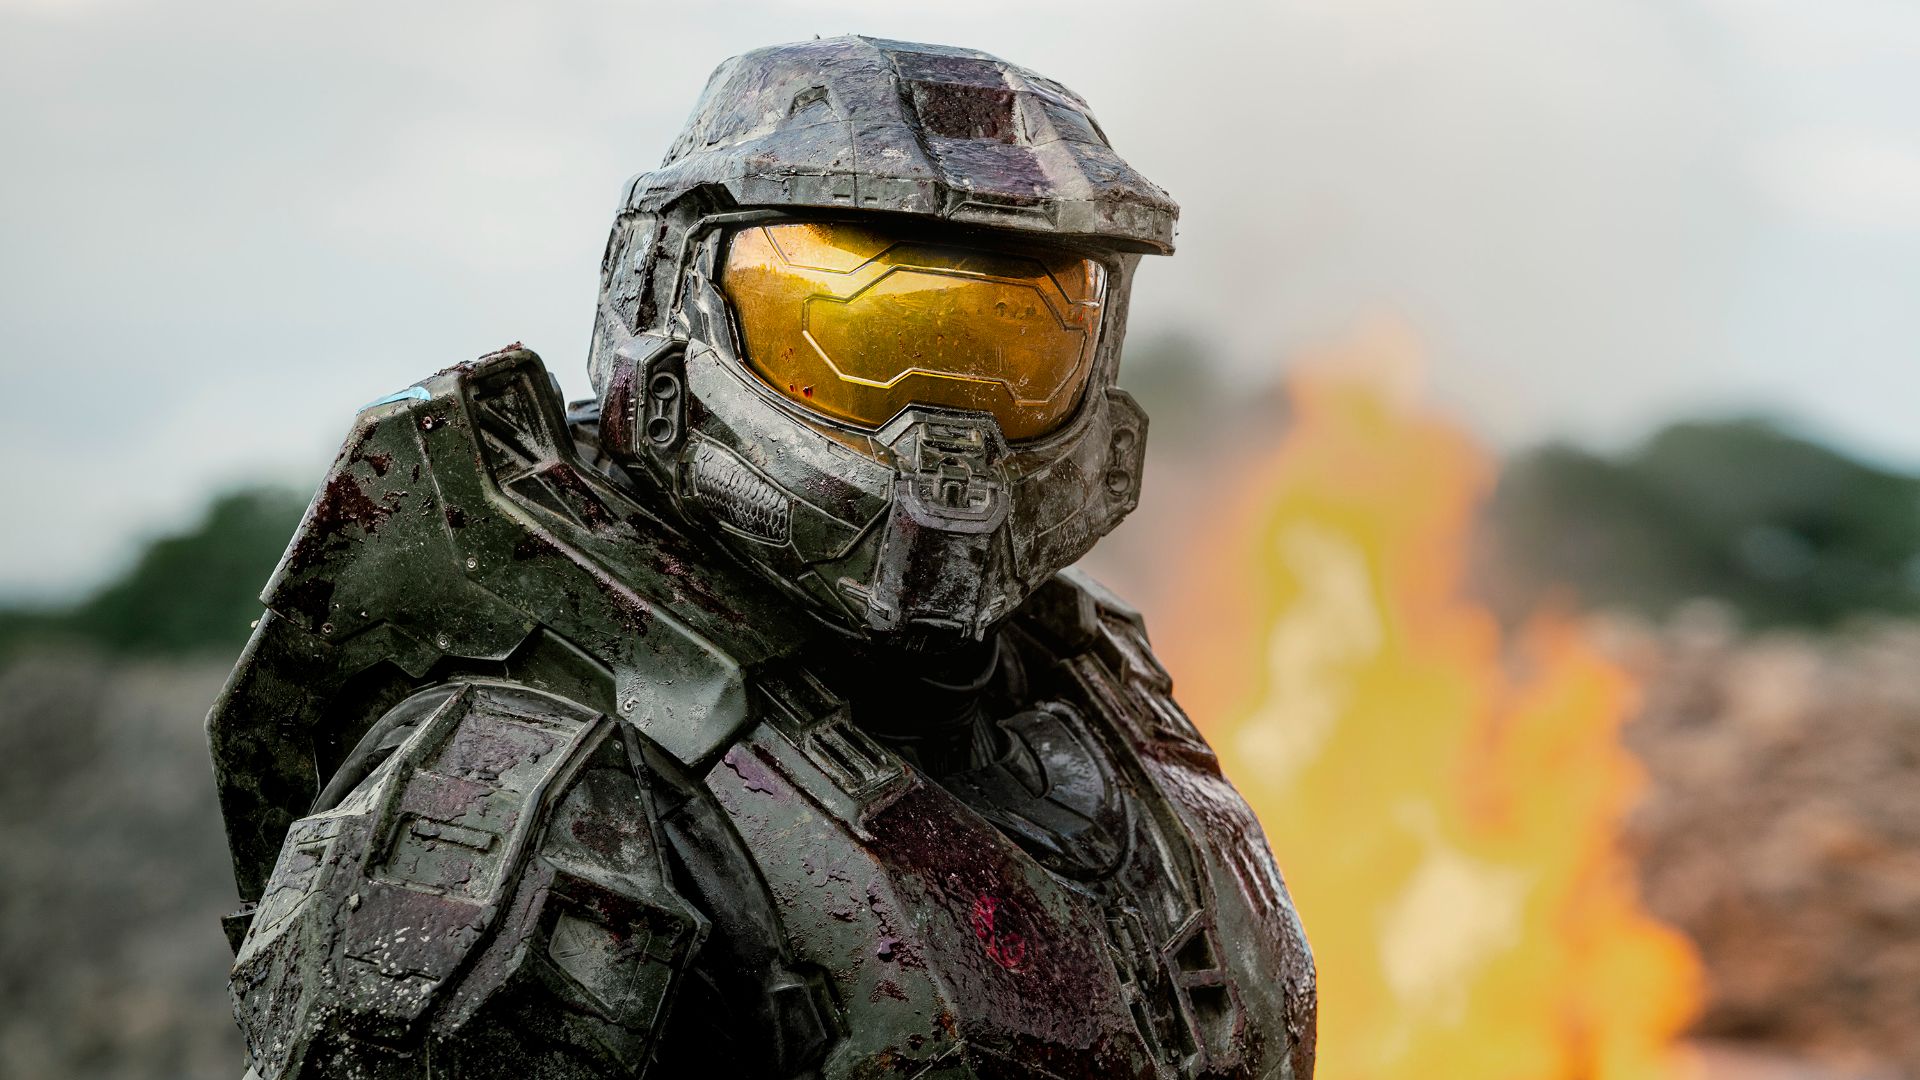 Halo’s Pablo Schreiber says his Master Chief was meant to be “slightly uncomfortable” for fans